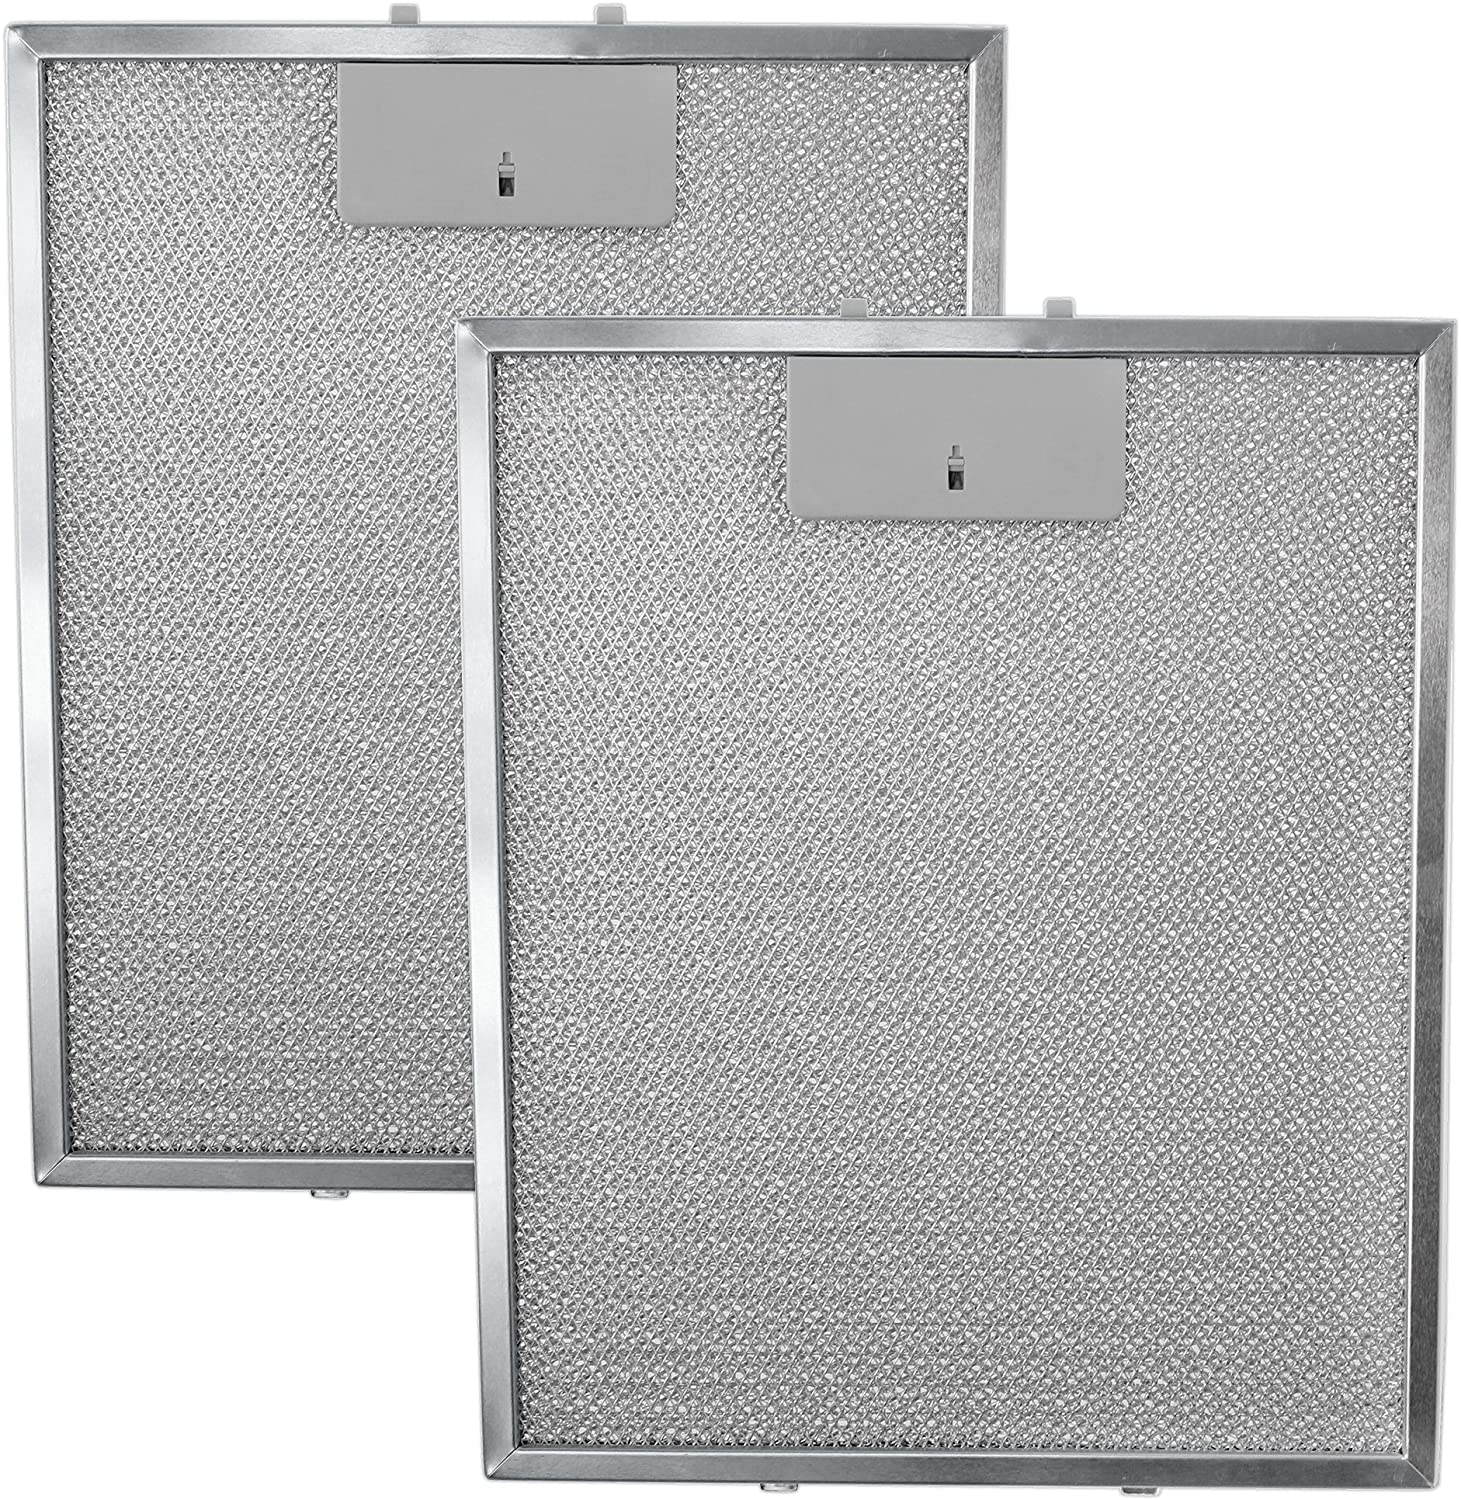 Cooker Hood Metal Mesh Grease Filter for Logik Kitchen Extractor Fan Vent (Silver, 300 x 250 mm, Pack of 2)